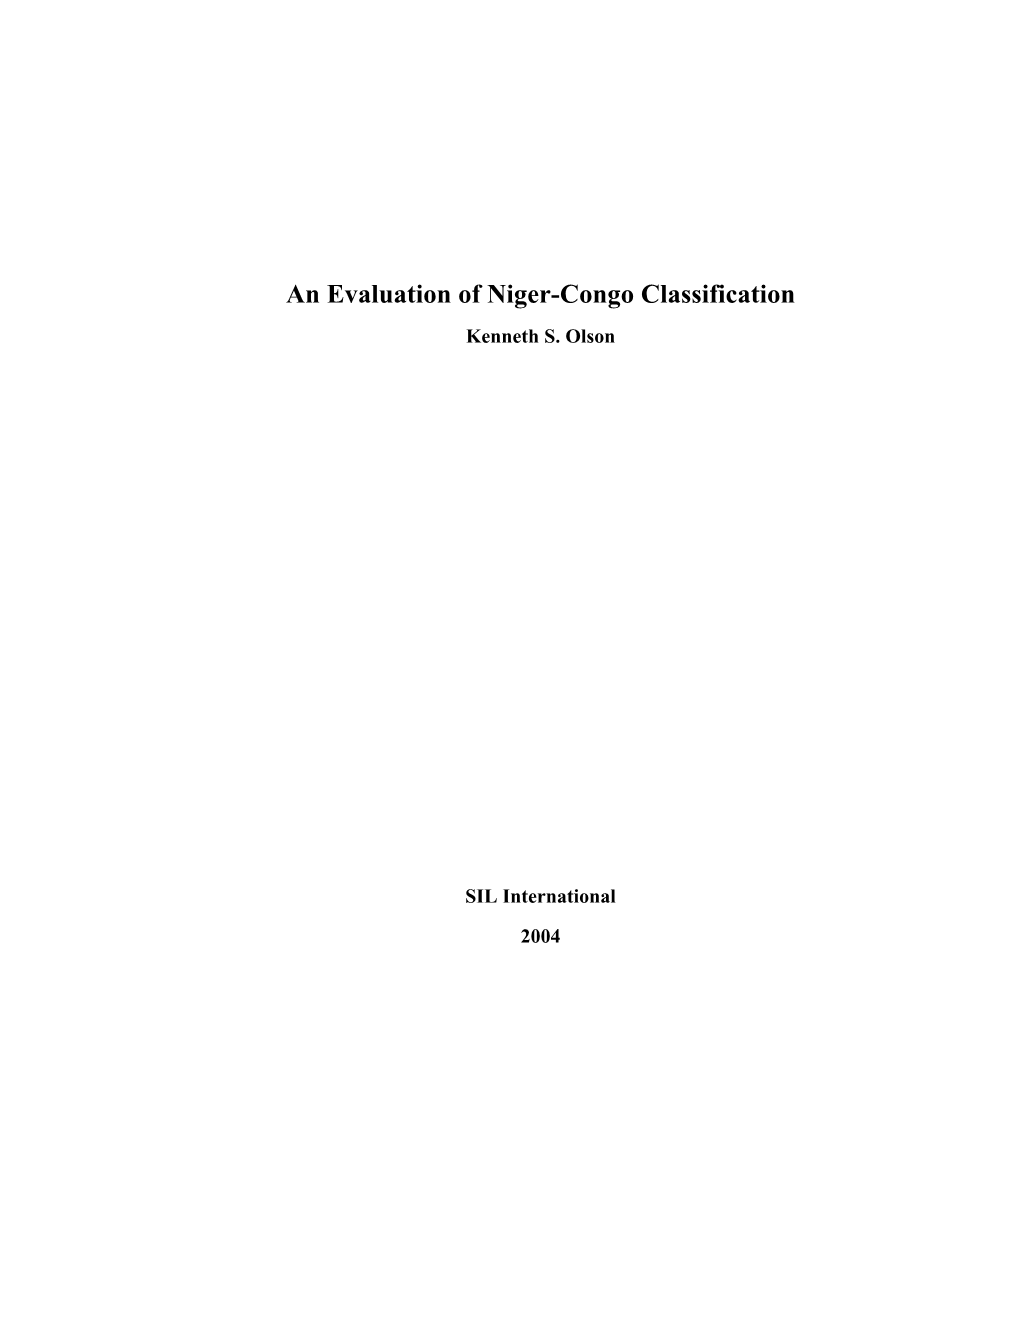 An Evaluation of Niger-Congo Classification Kenneth S